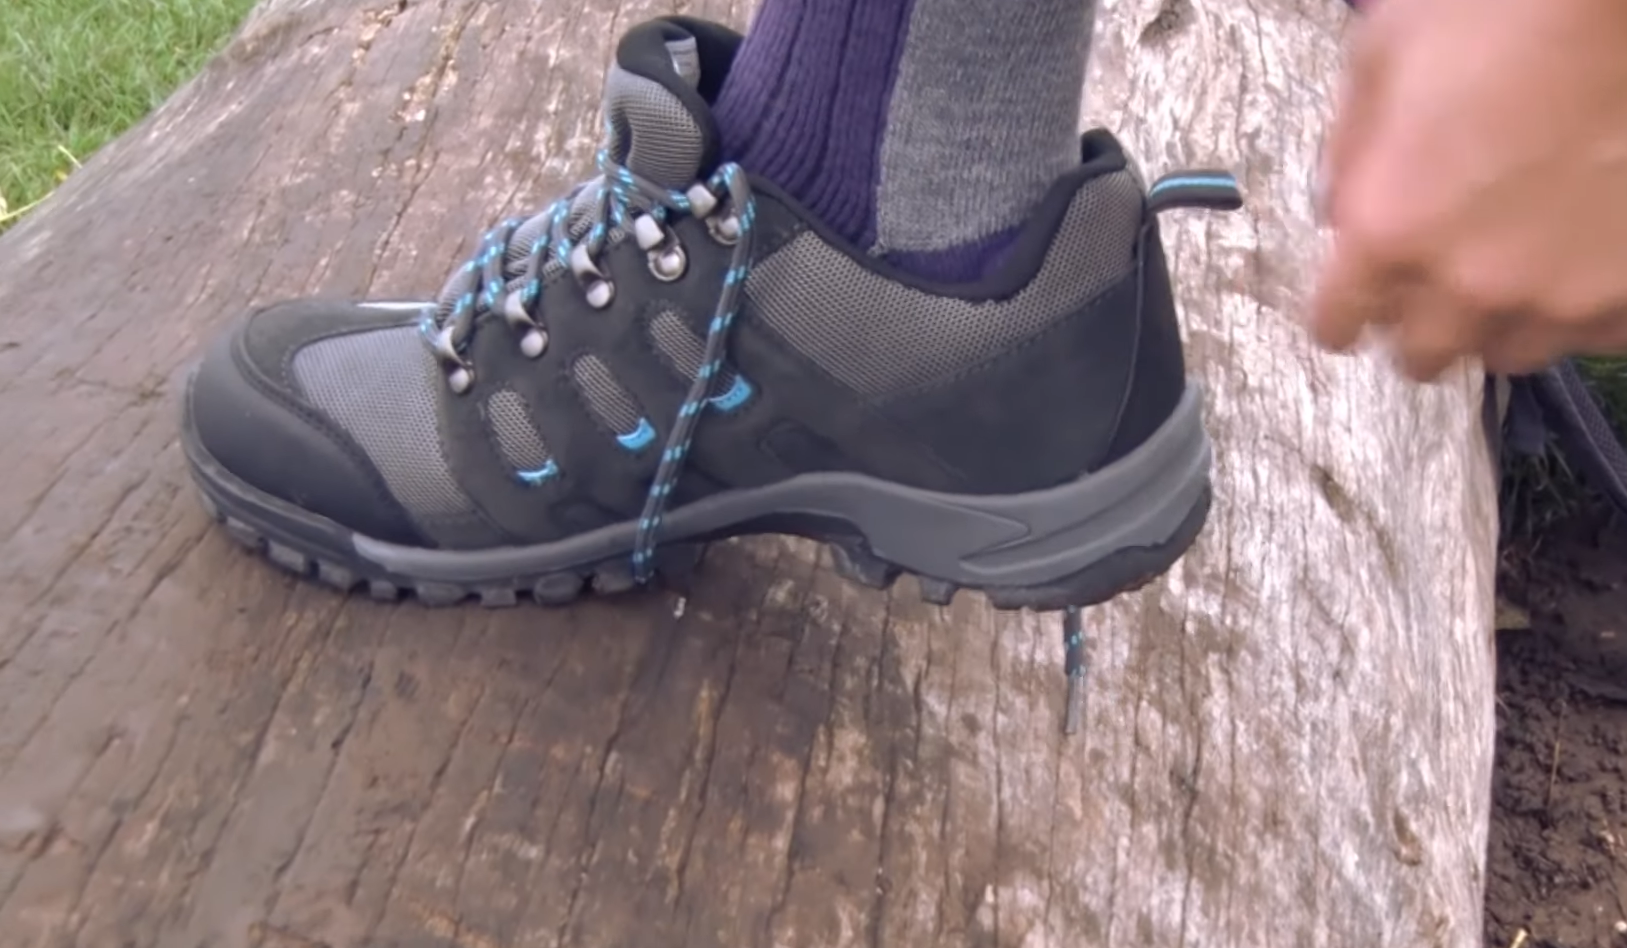 Tips on Picking Hiking Boots